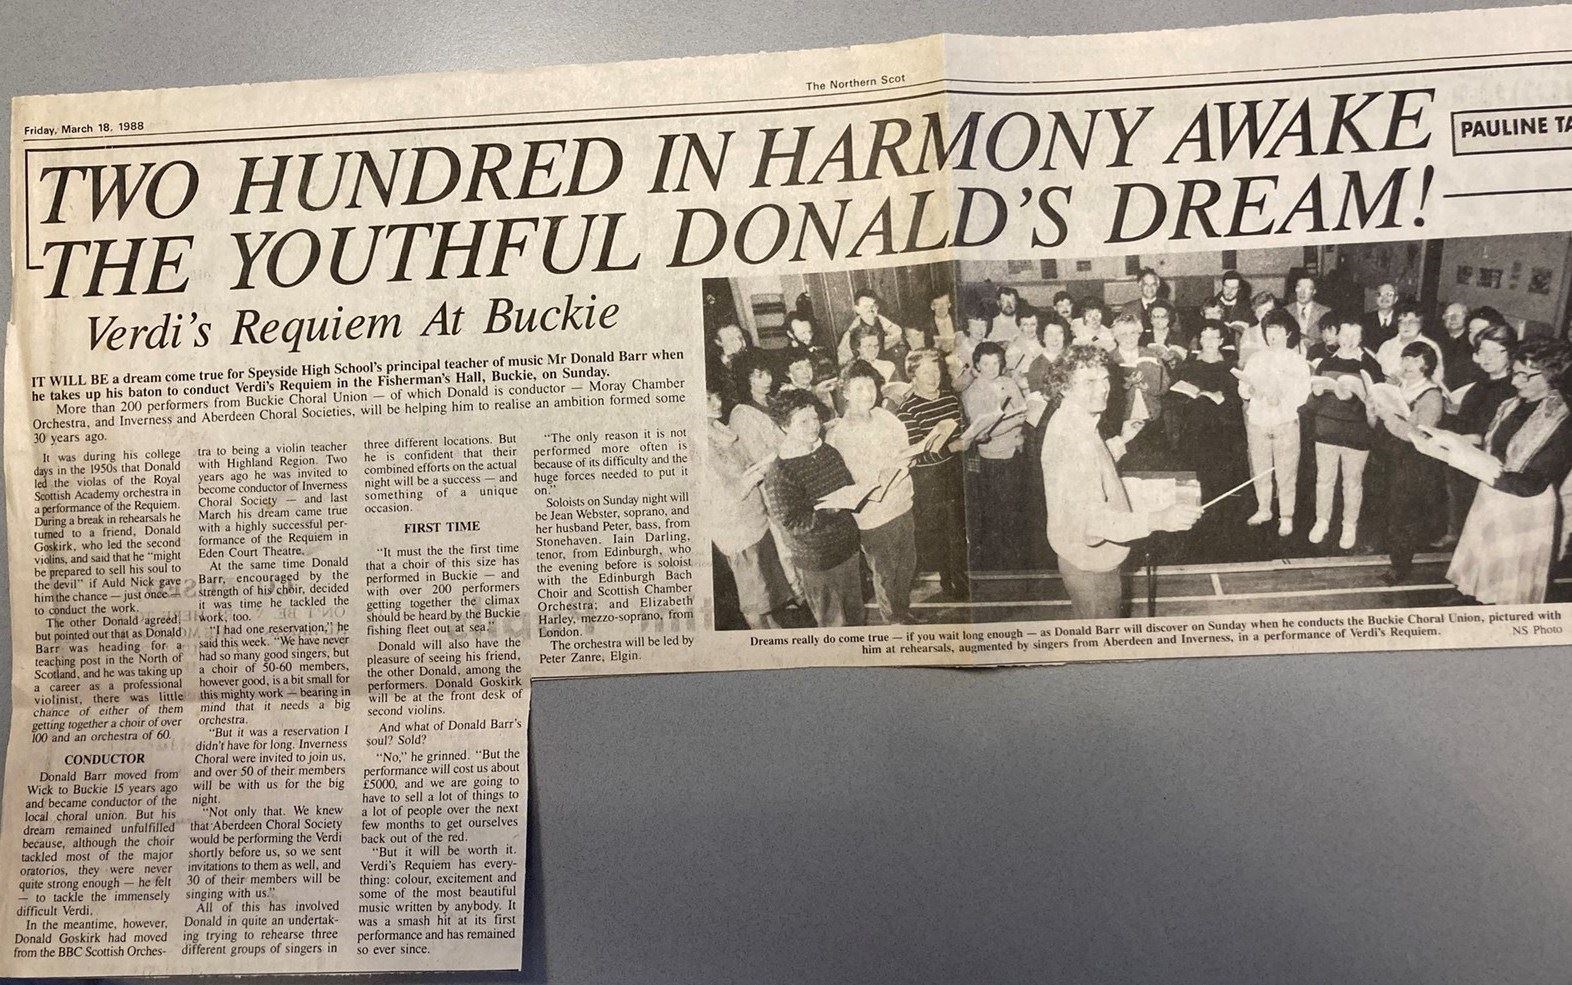 An article from 1988 in the Northern Scot about Donald and the Buckie Choral Union.